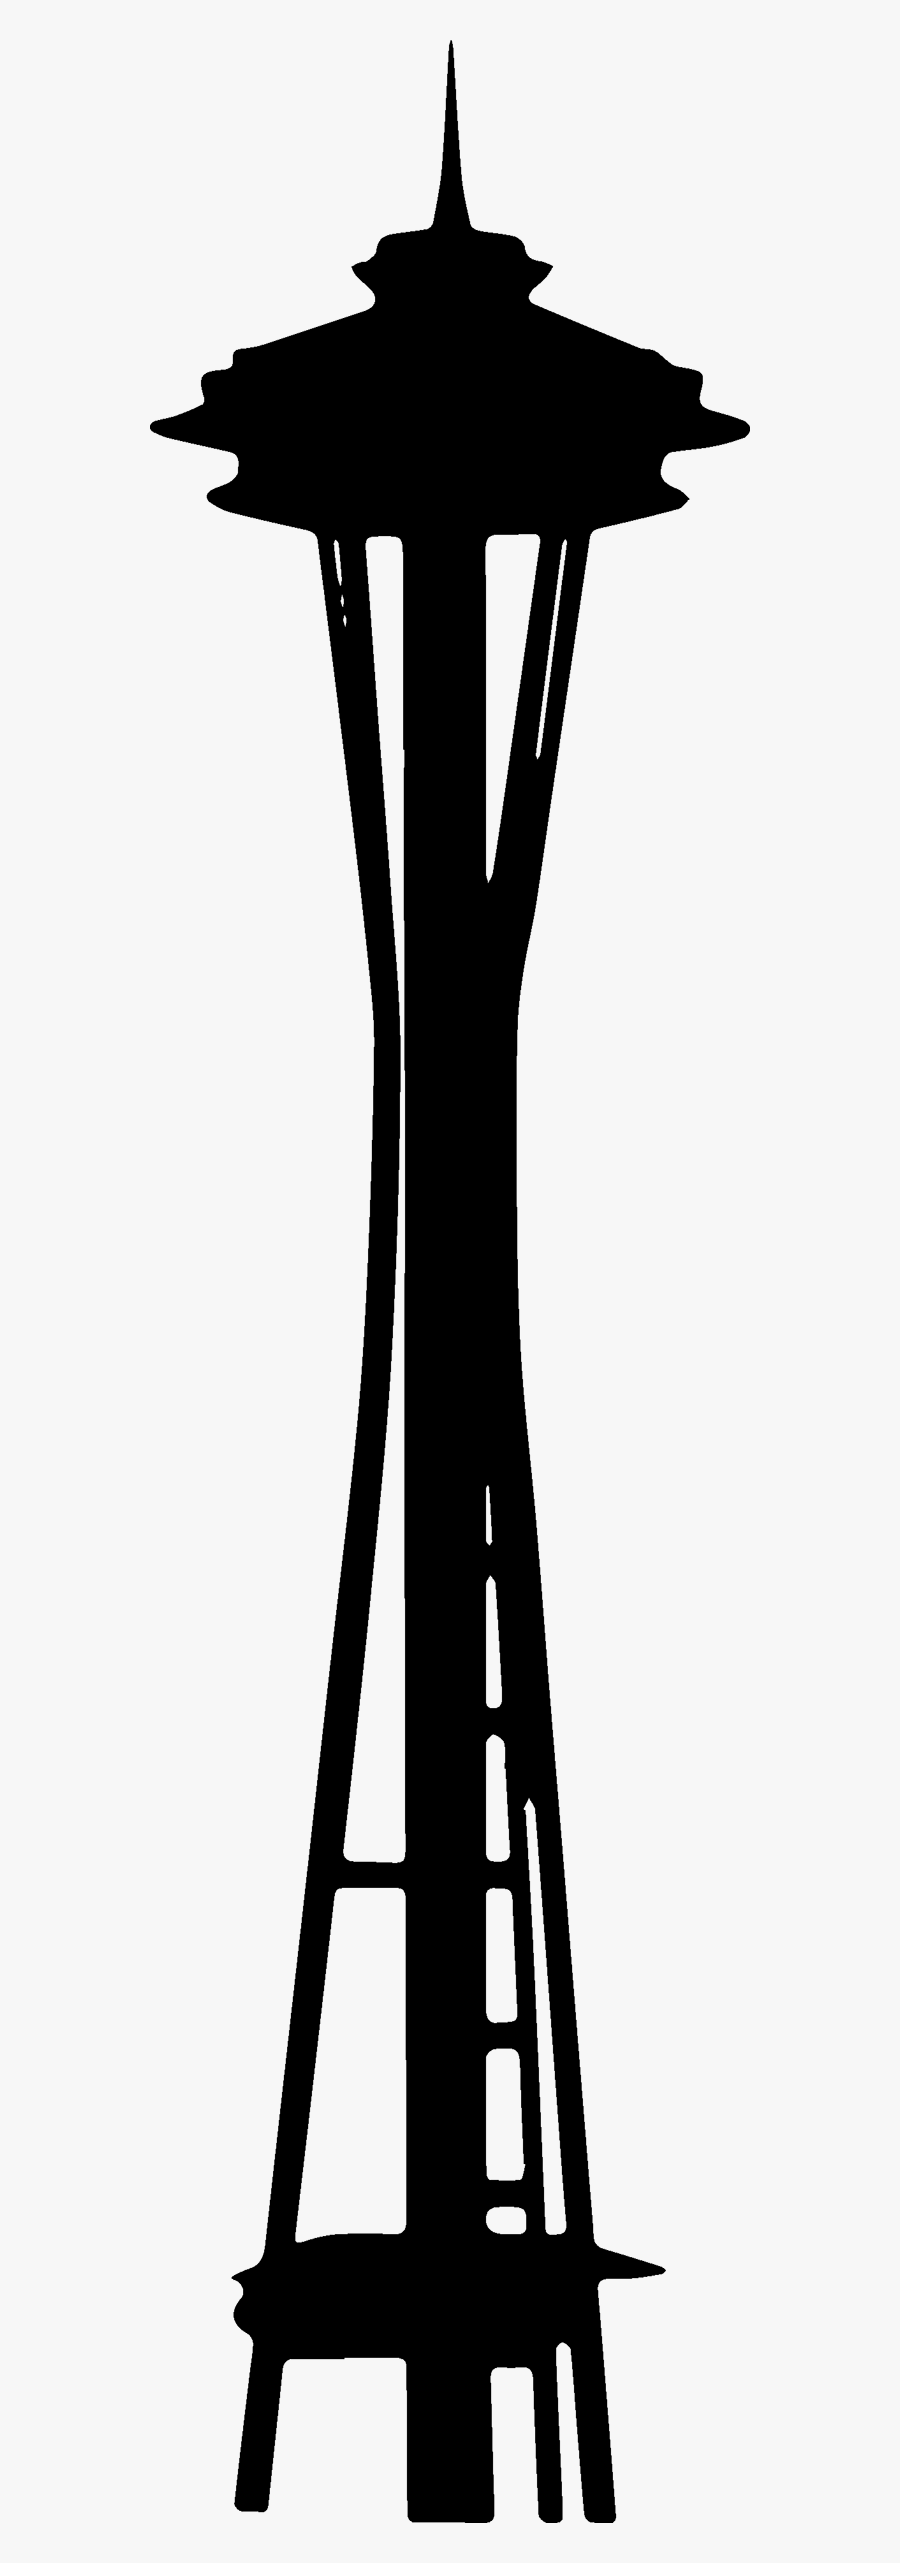 The Seattle Space Needle On Emaze - Space Needle Silhouette Vector, Transparent Clipart